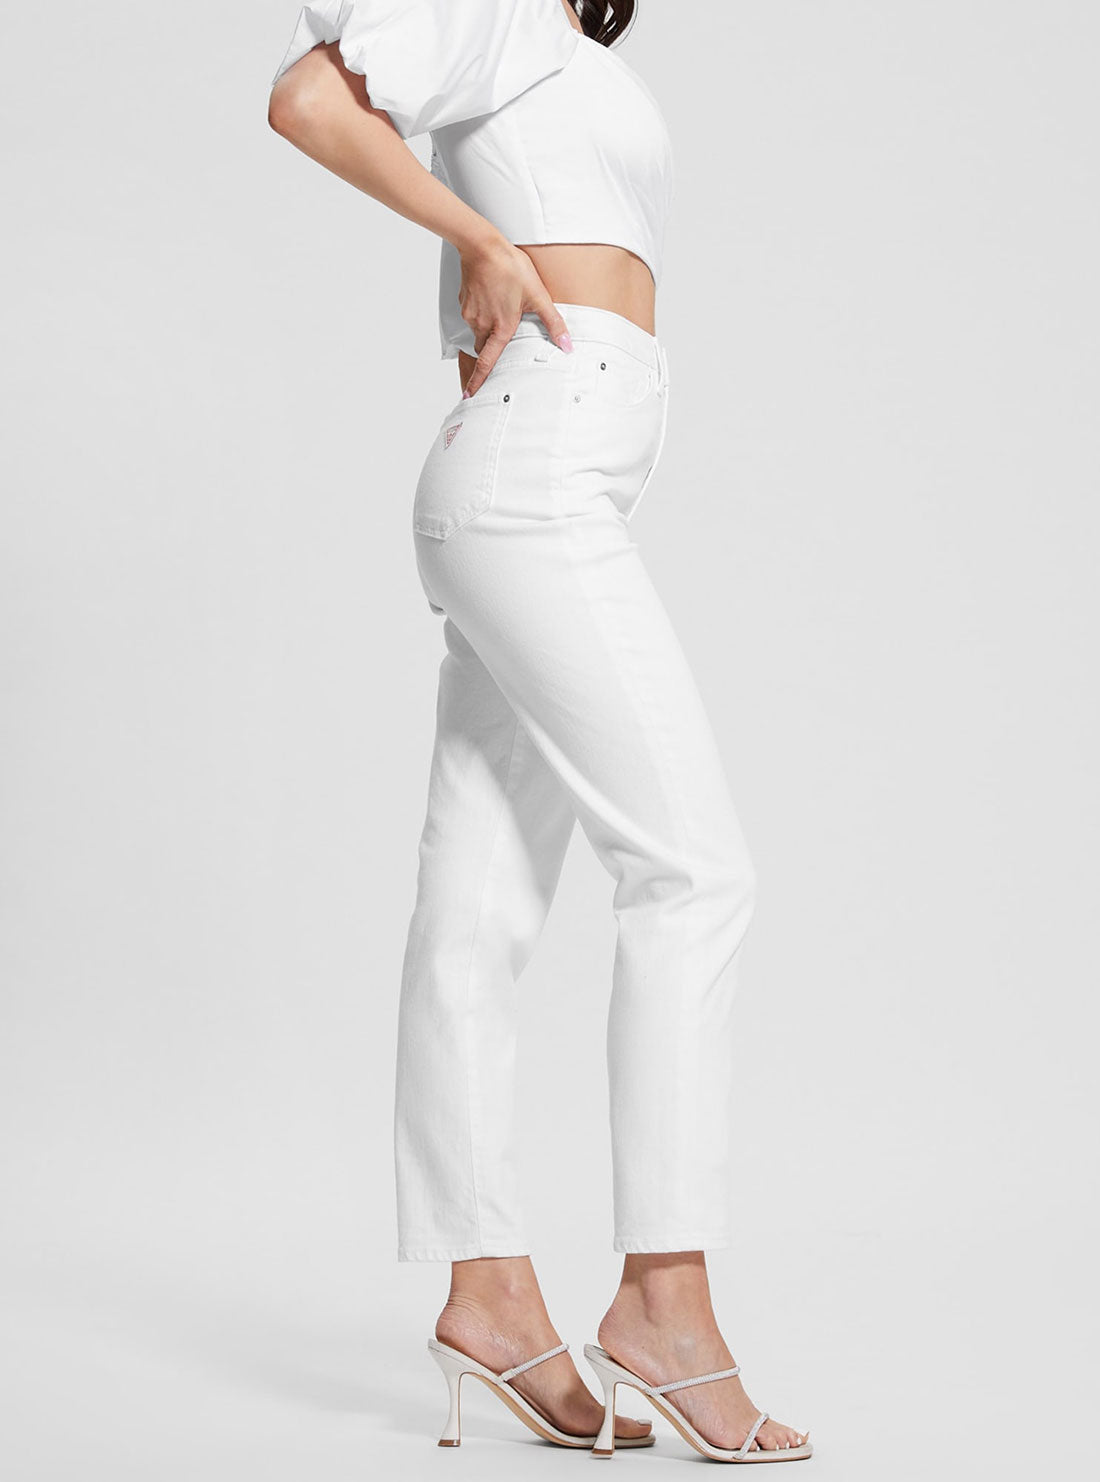 GUESS Women's High-Rise Straight Leg Denim Mom Jeans in Pure White Wash WBGA21D4T50 Side View